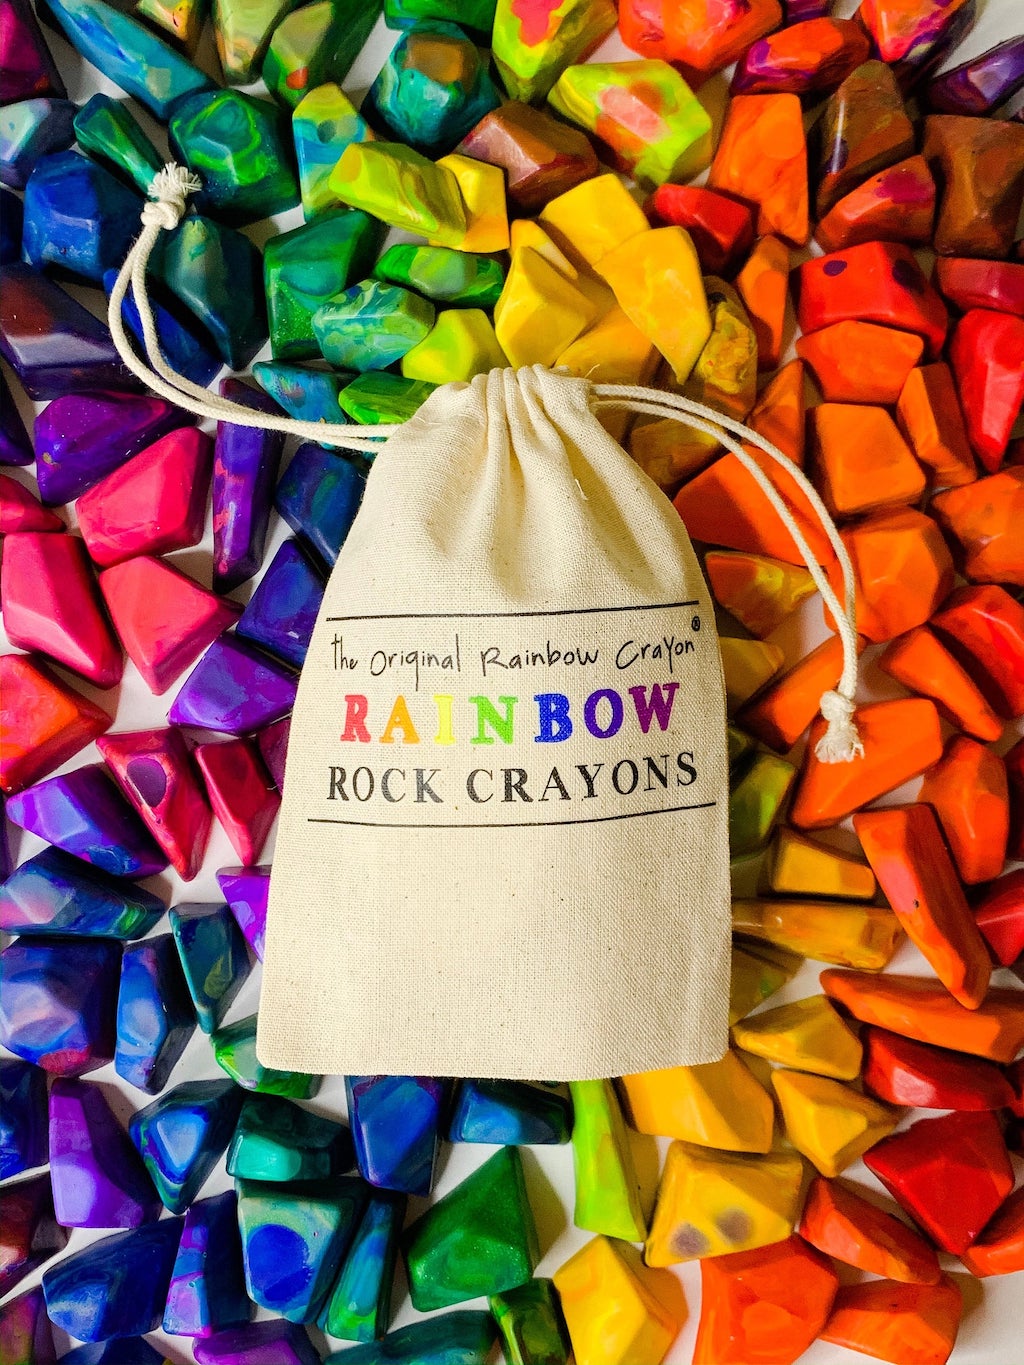 Rock Crayons - Rainbow Rock Crayons for Kids from Art 2 the Extreme® The Original Rainbow Crayon® - Kids Arts and Craft Supplies Crayon Gift Set